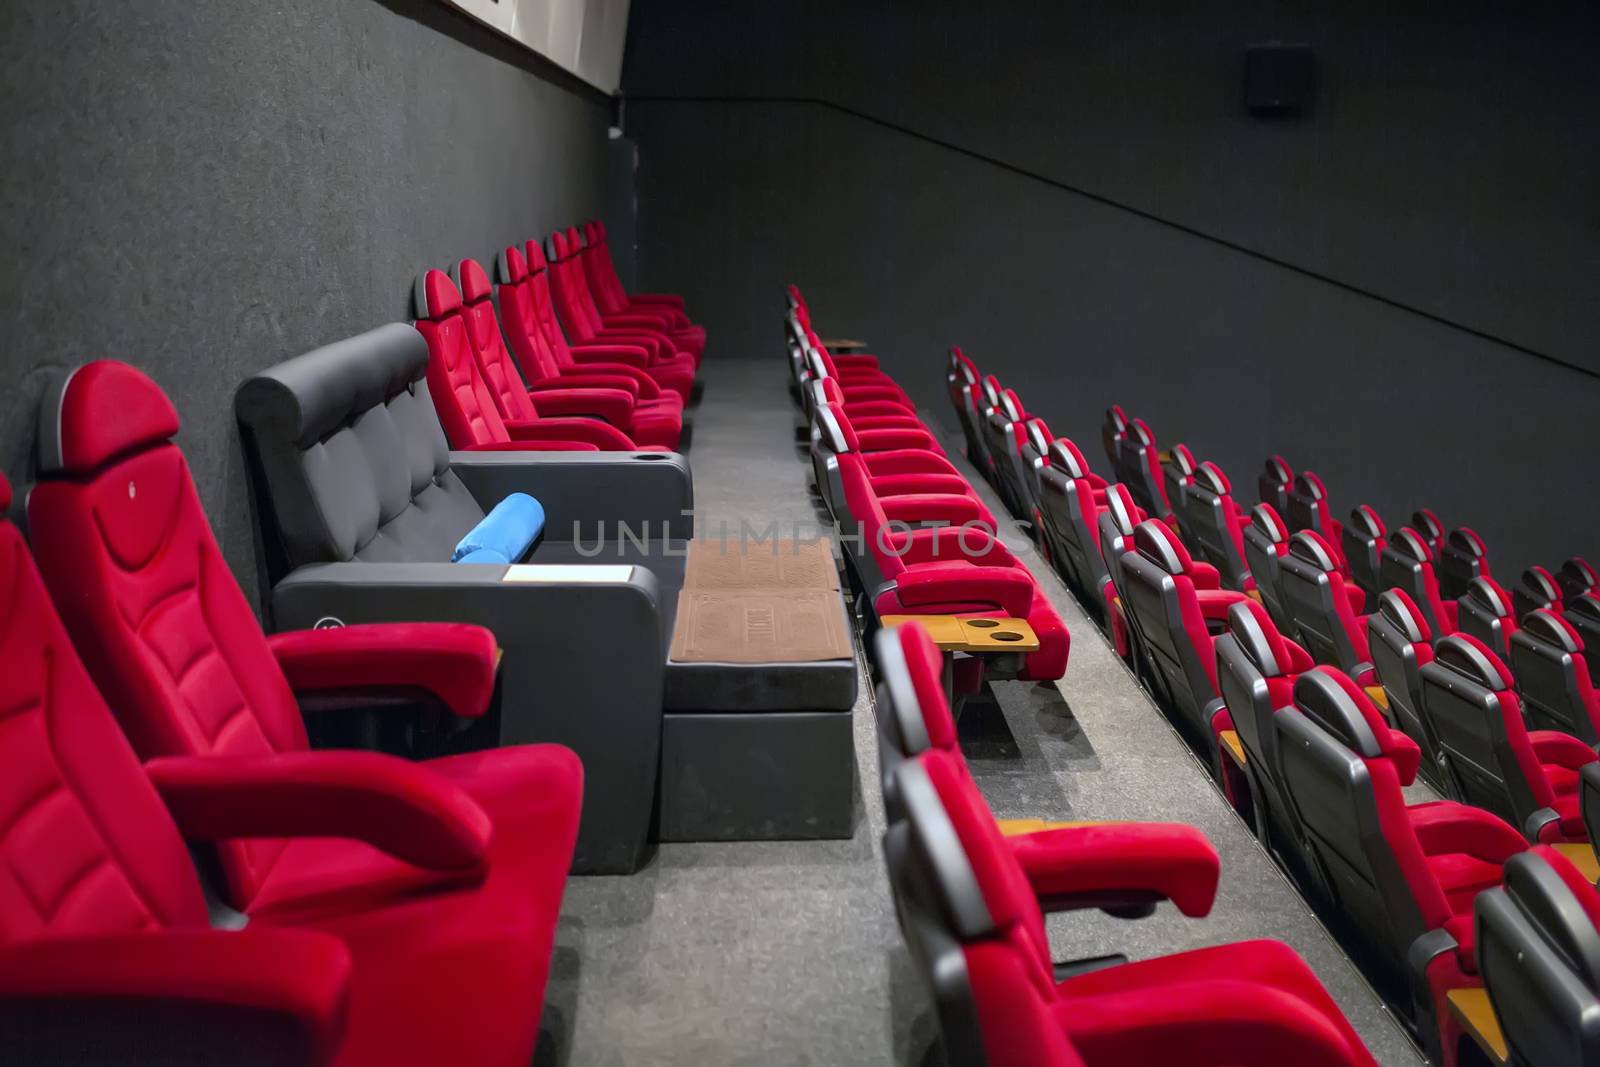 VIP chair in an empty cinema among red soft chairs.